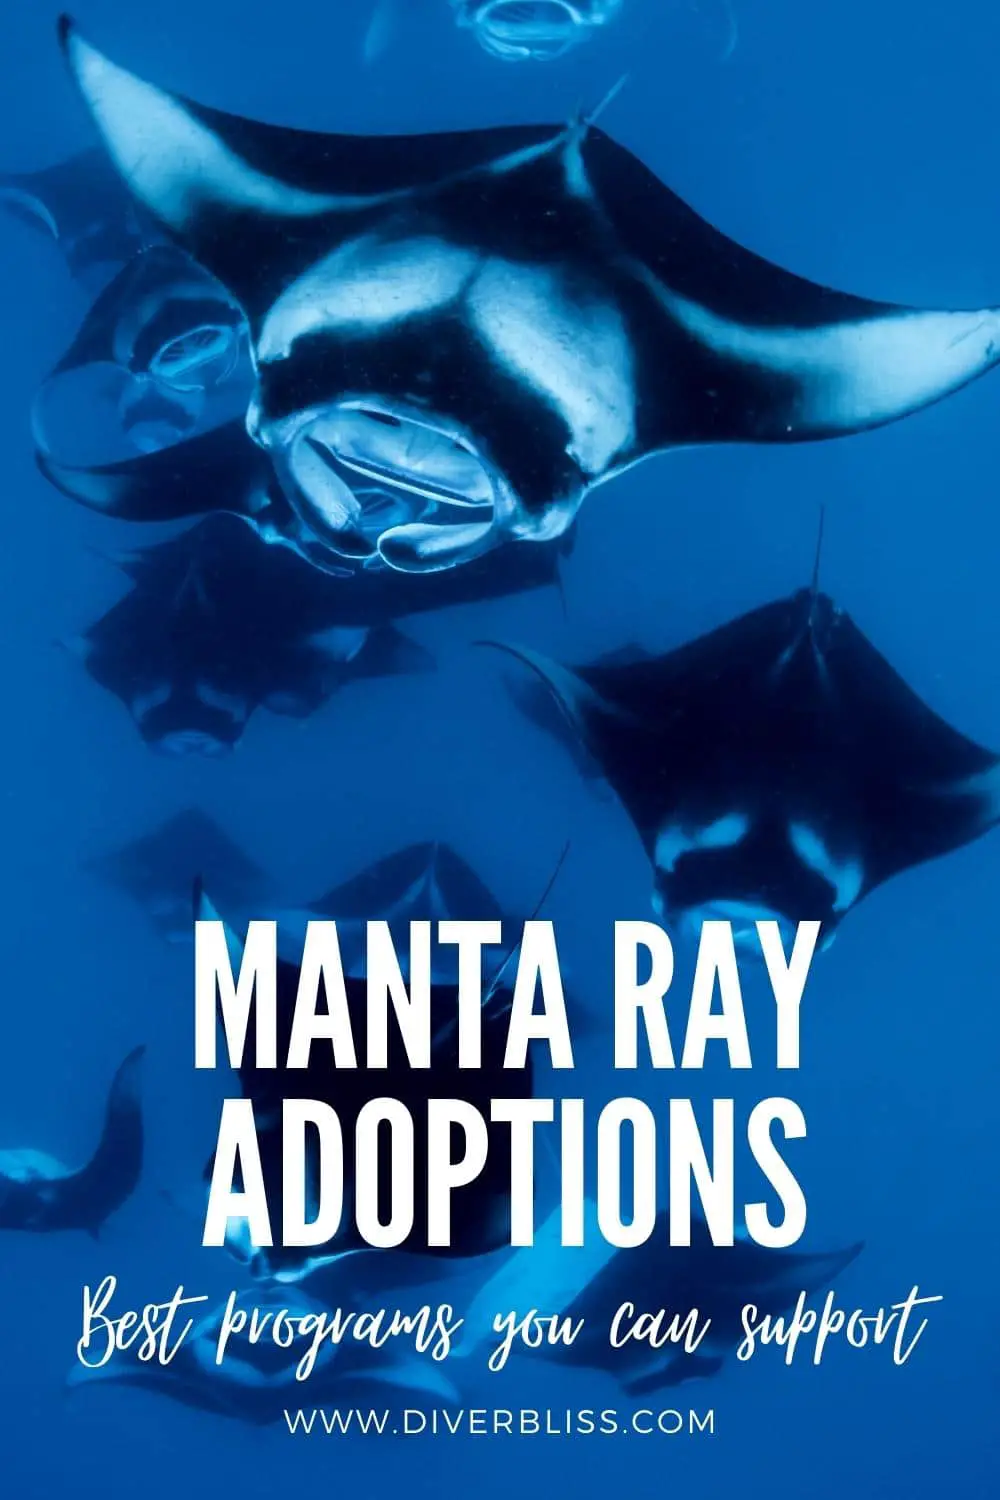 best manta ray adoptions programs you can support 